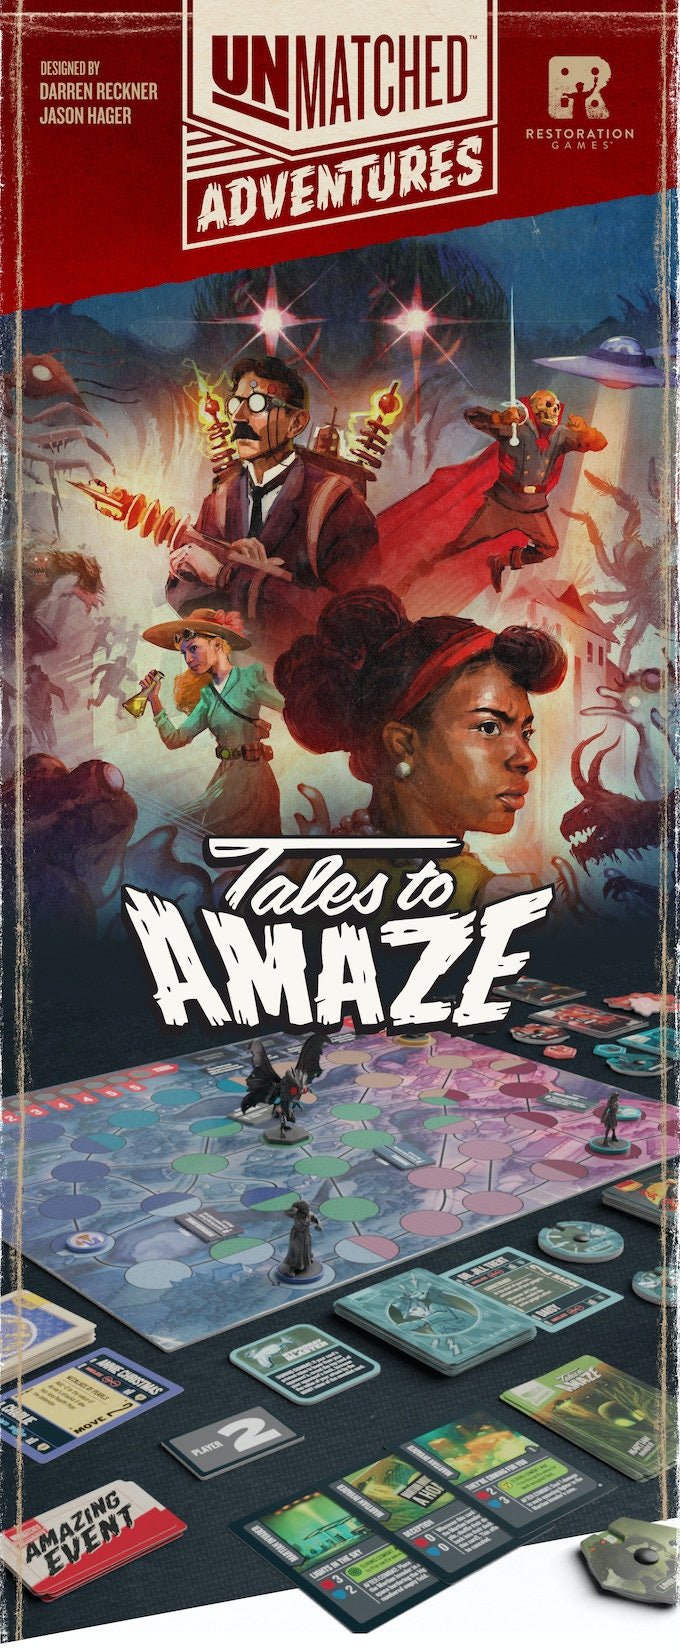 Unmatched Adventures: Tales to Amaze (Kickstarter) - Gaming Library